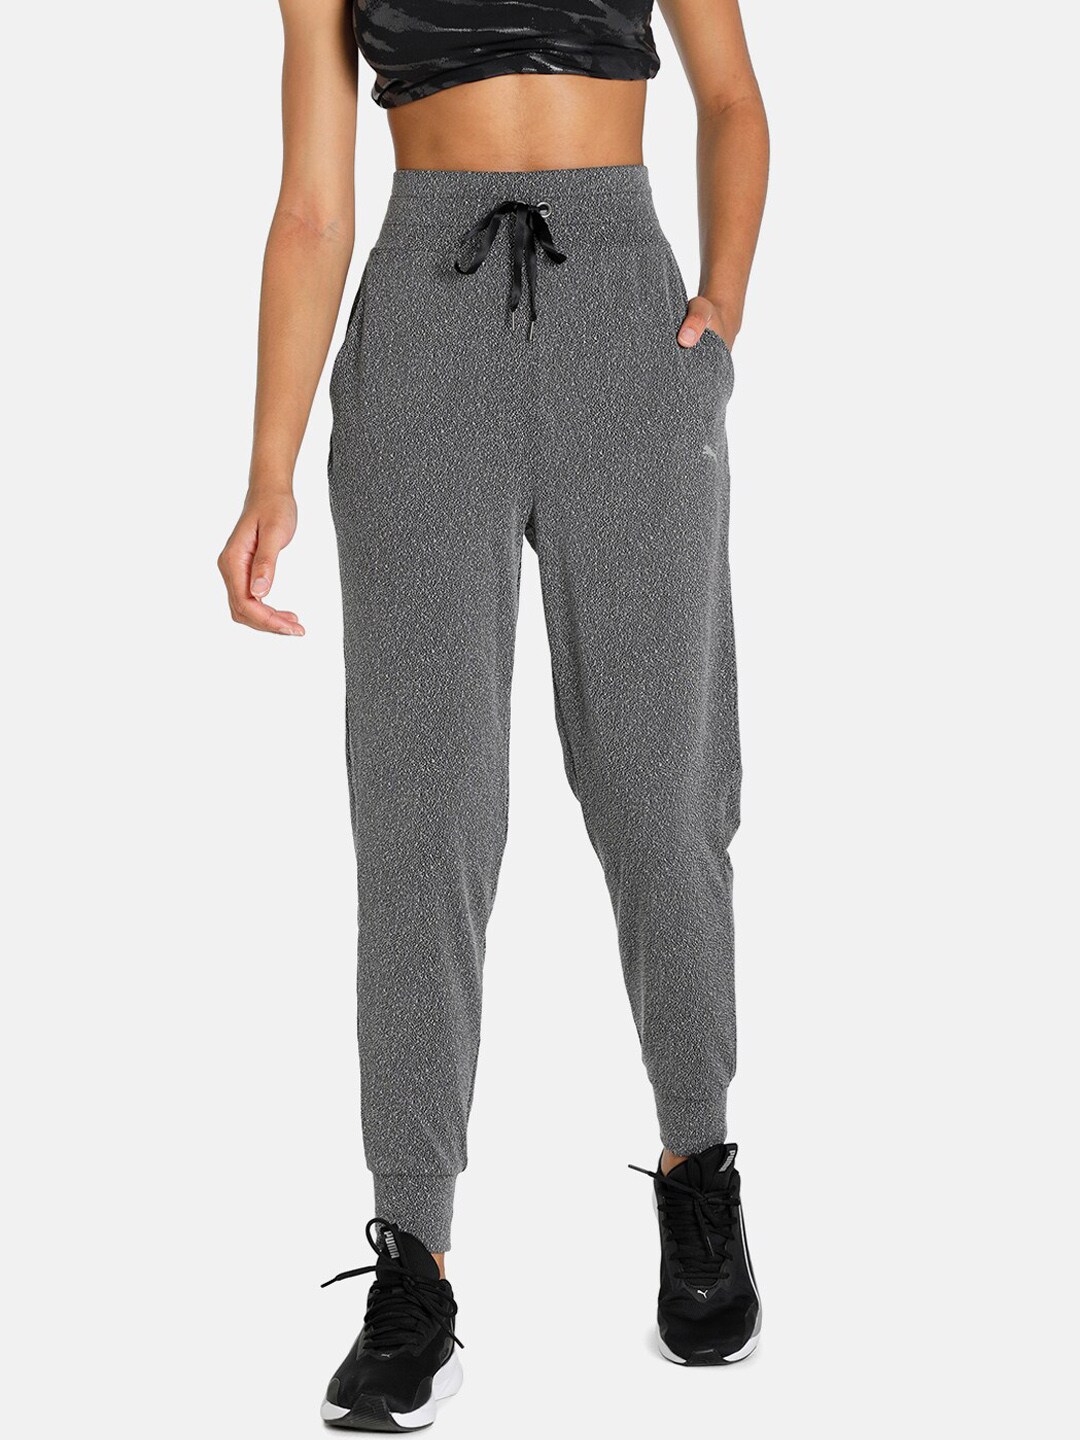 Puma Women Black Stardust Knitted Training Joggers Price in India